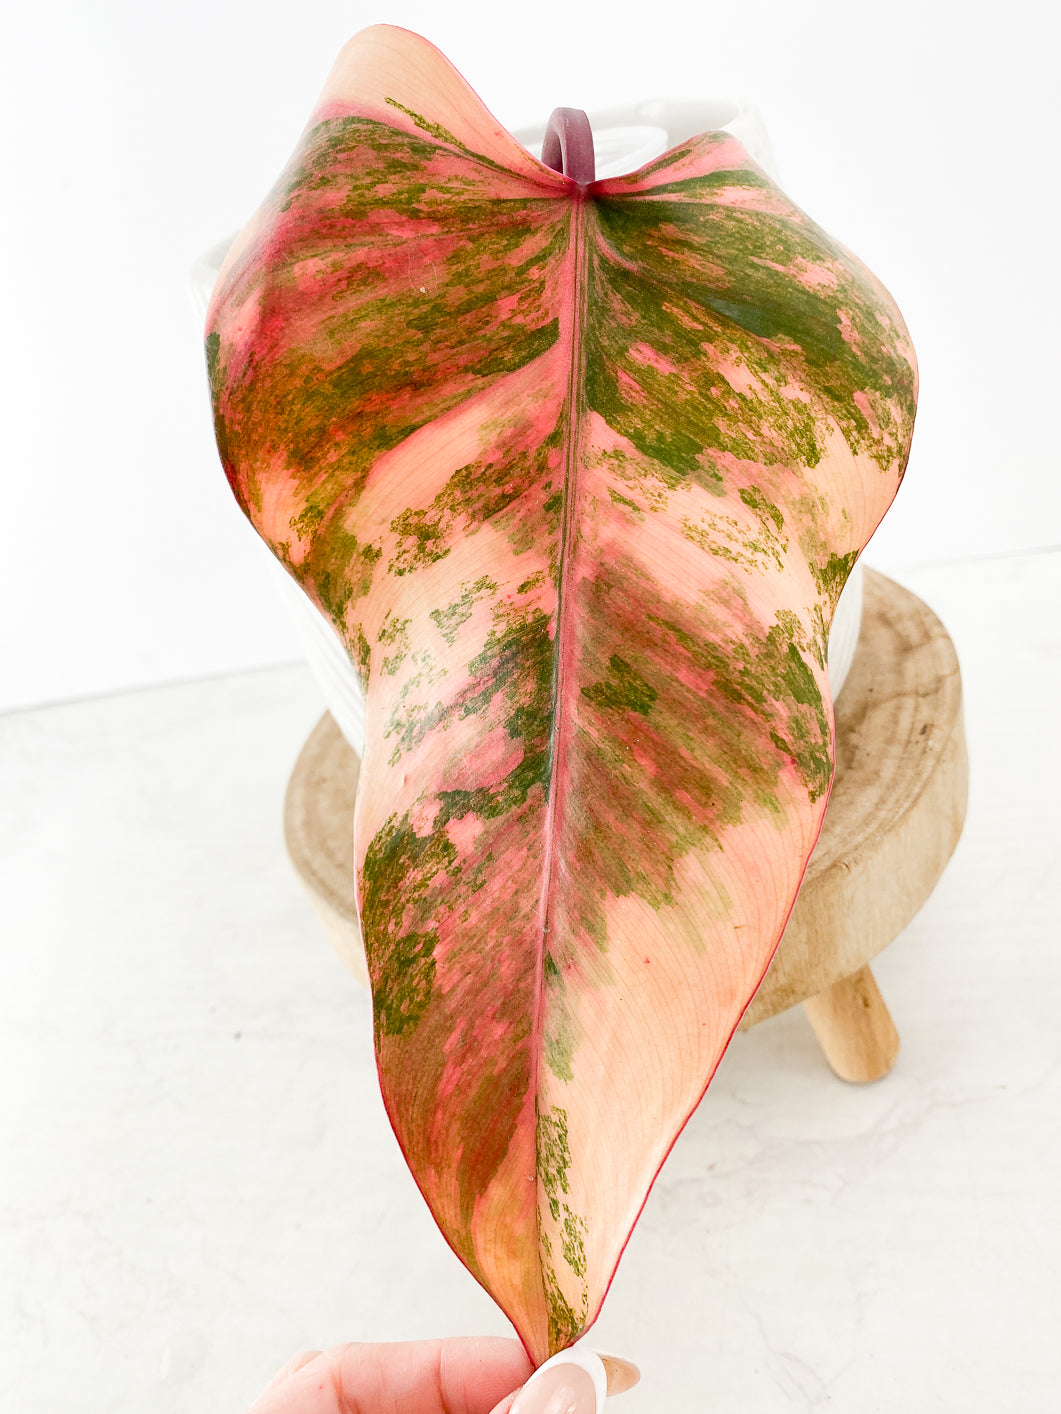 Philodendron Strawberry shake 1 leaf highly variegated 1 bud rooting